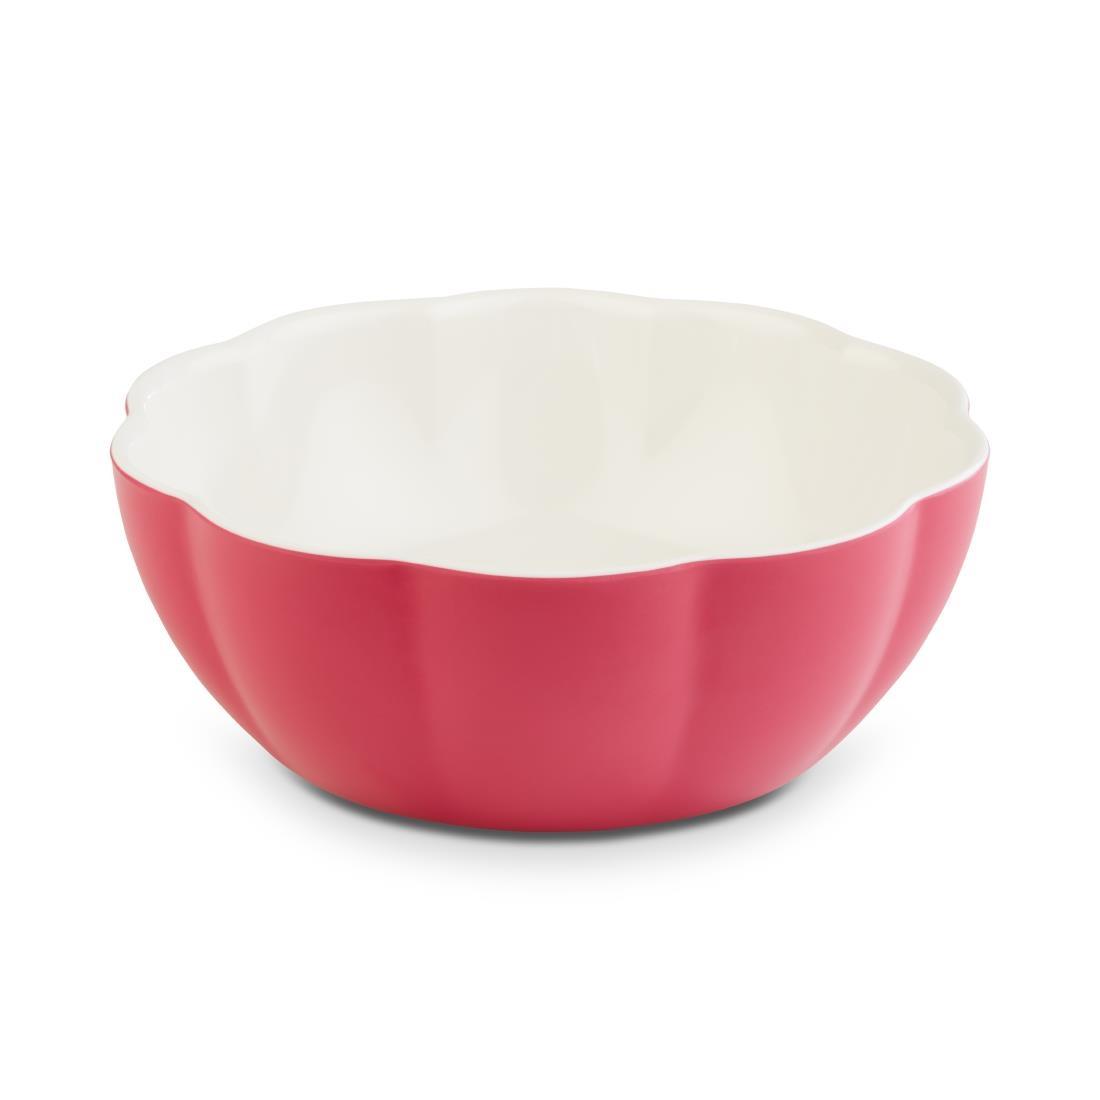 APS+ Lotus Bowl Red and White 130mm - Each - DT787 - 1